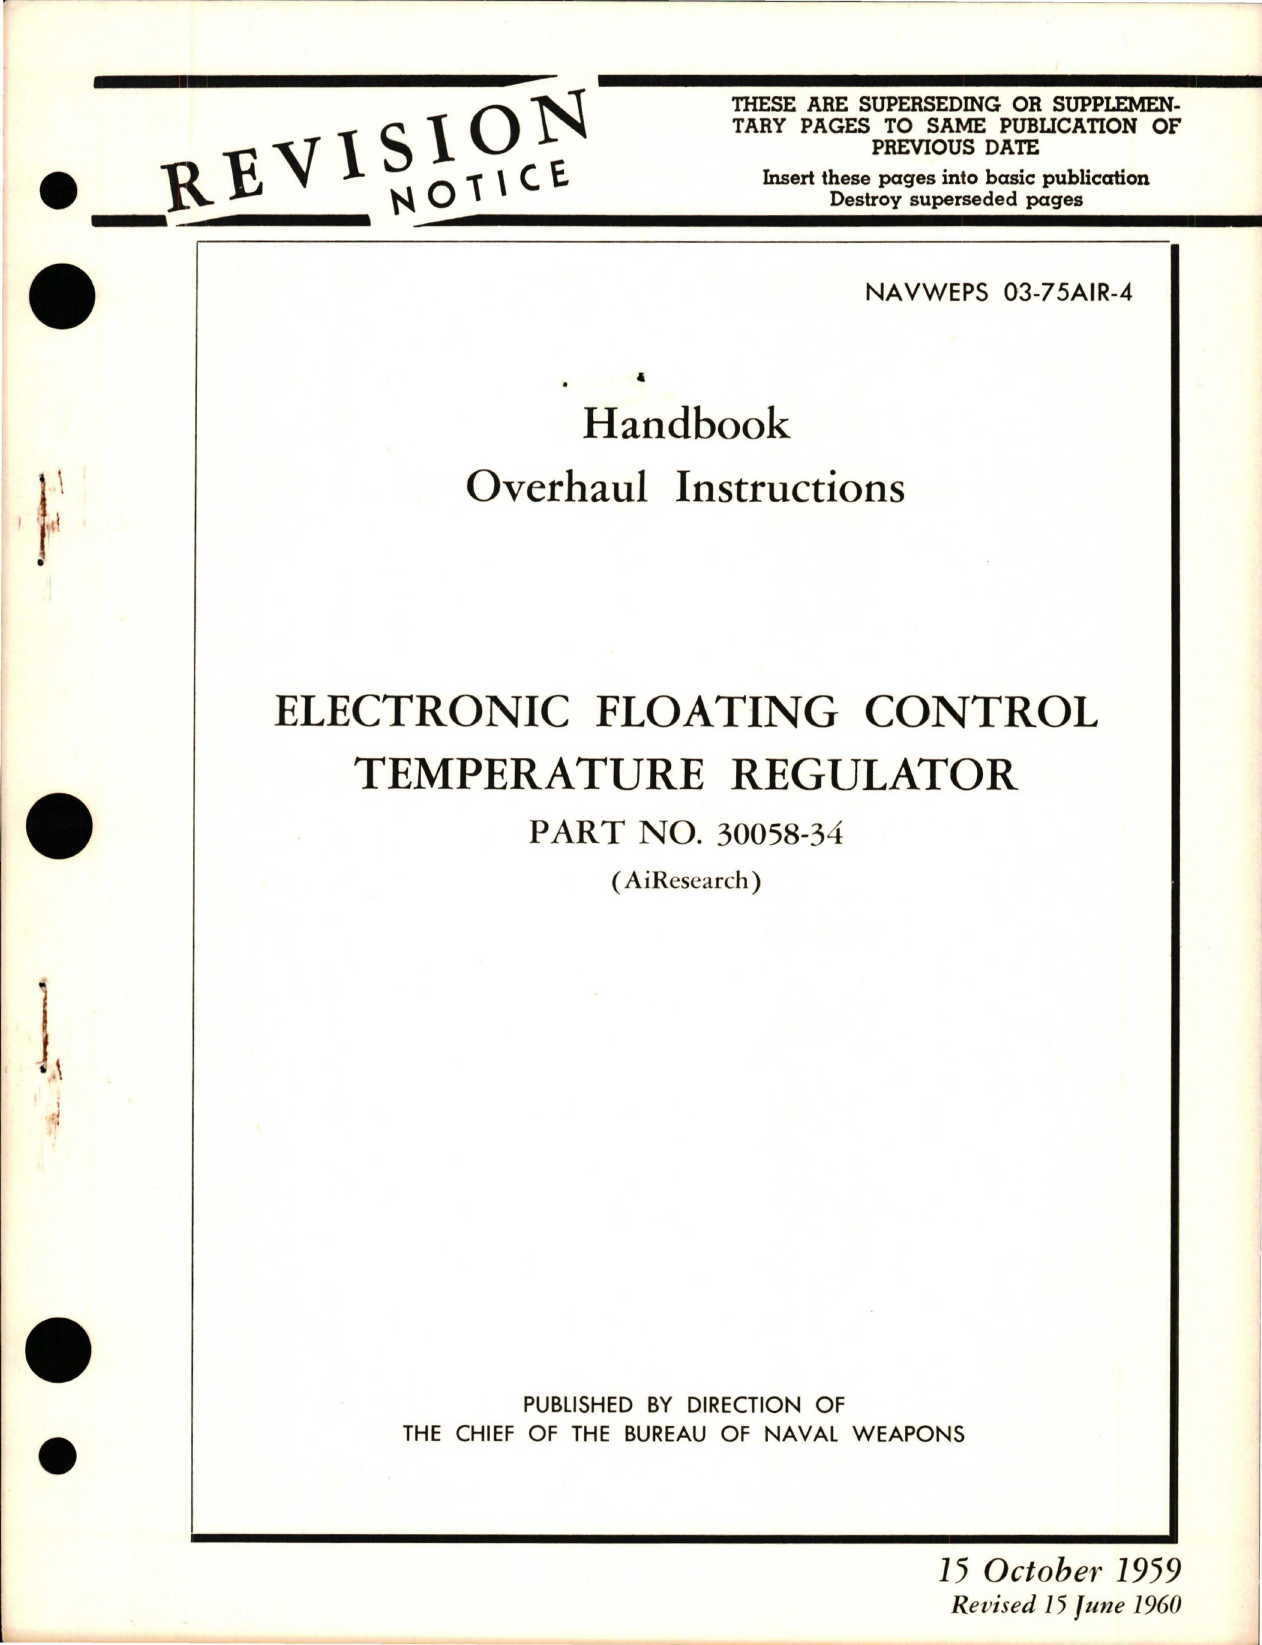 Sample page 1 from AirCorps Library document: Overhaul Instructions for Electronic Floating Control Temperature Regulator - Part 30058-34